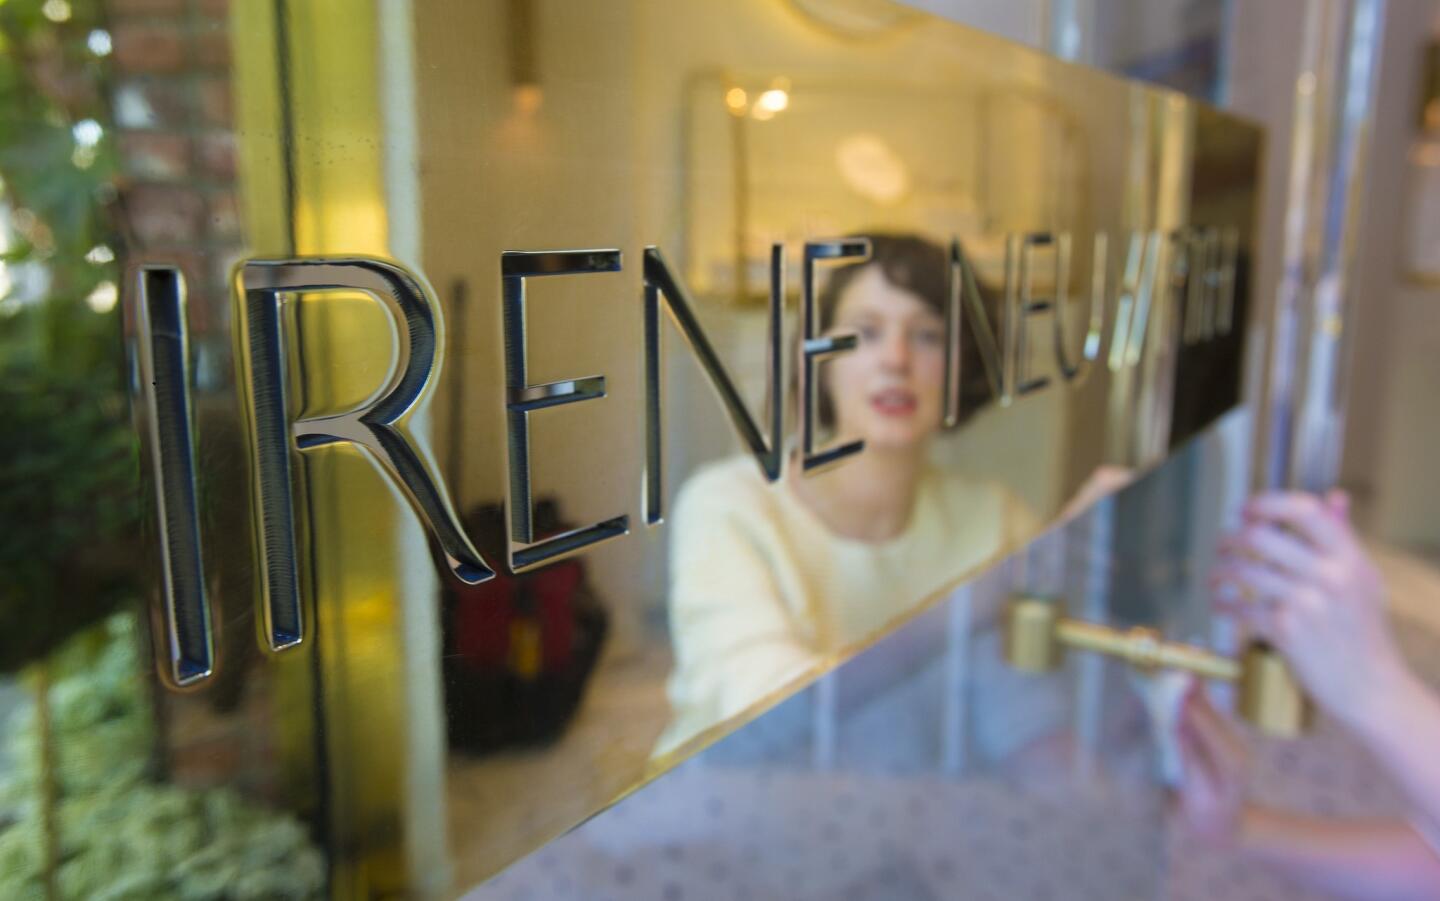 Jewelry designer Irene Neuwirth at her new Melrose Place flagship store.